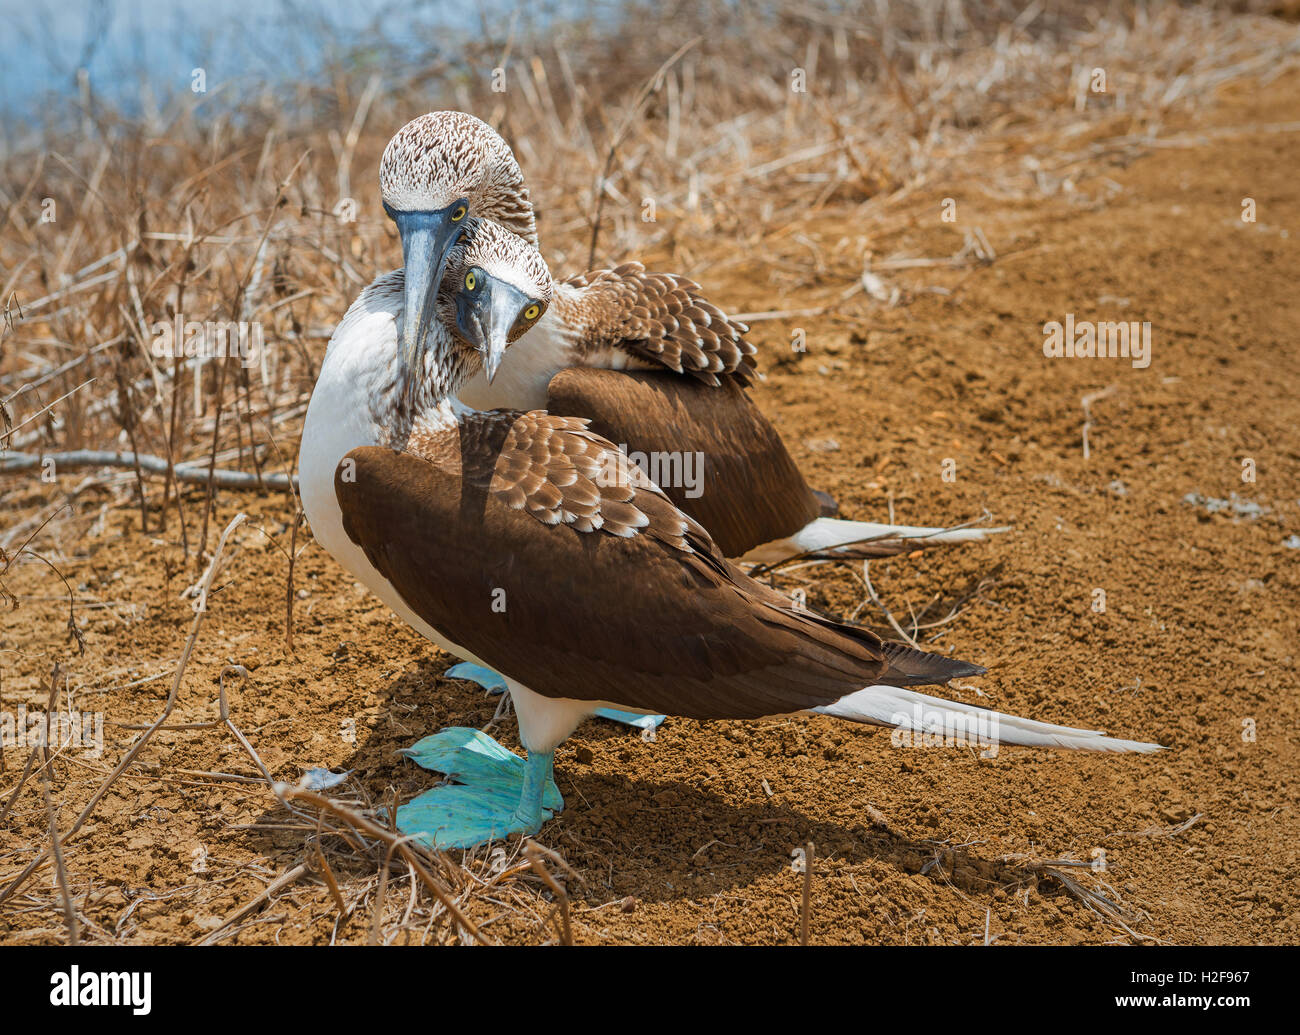 Blue footed boobies (sula nebouxii) hugging during their seduction rite on Espanola Island in the Galapagos, Ecuador. Stock Photo